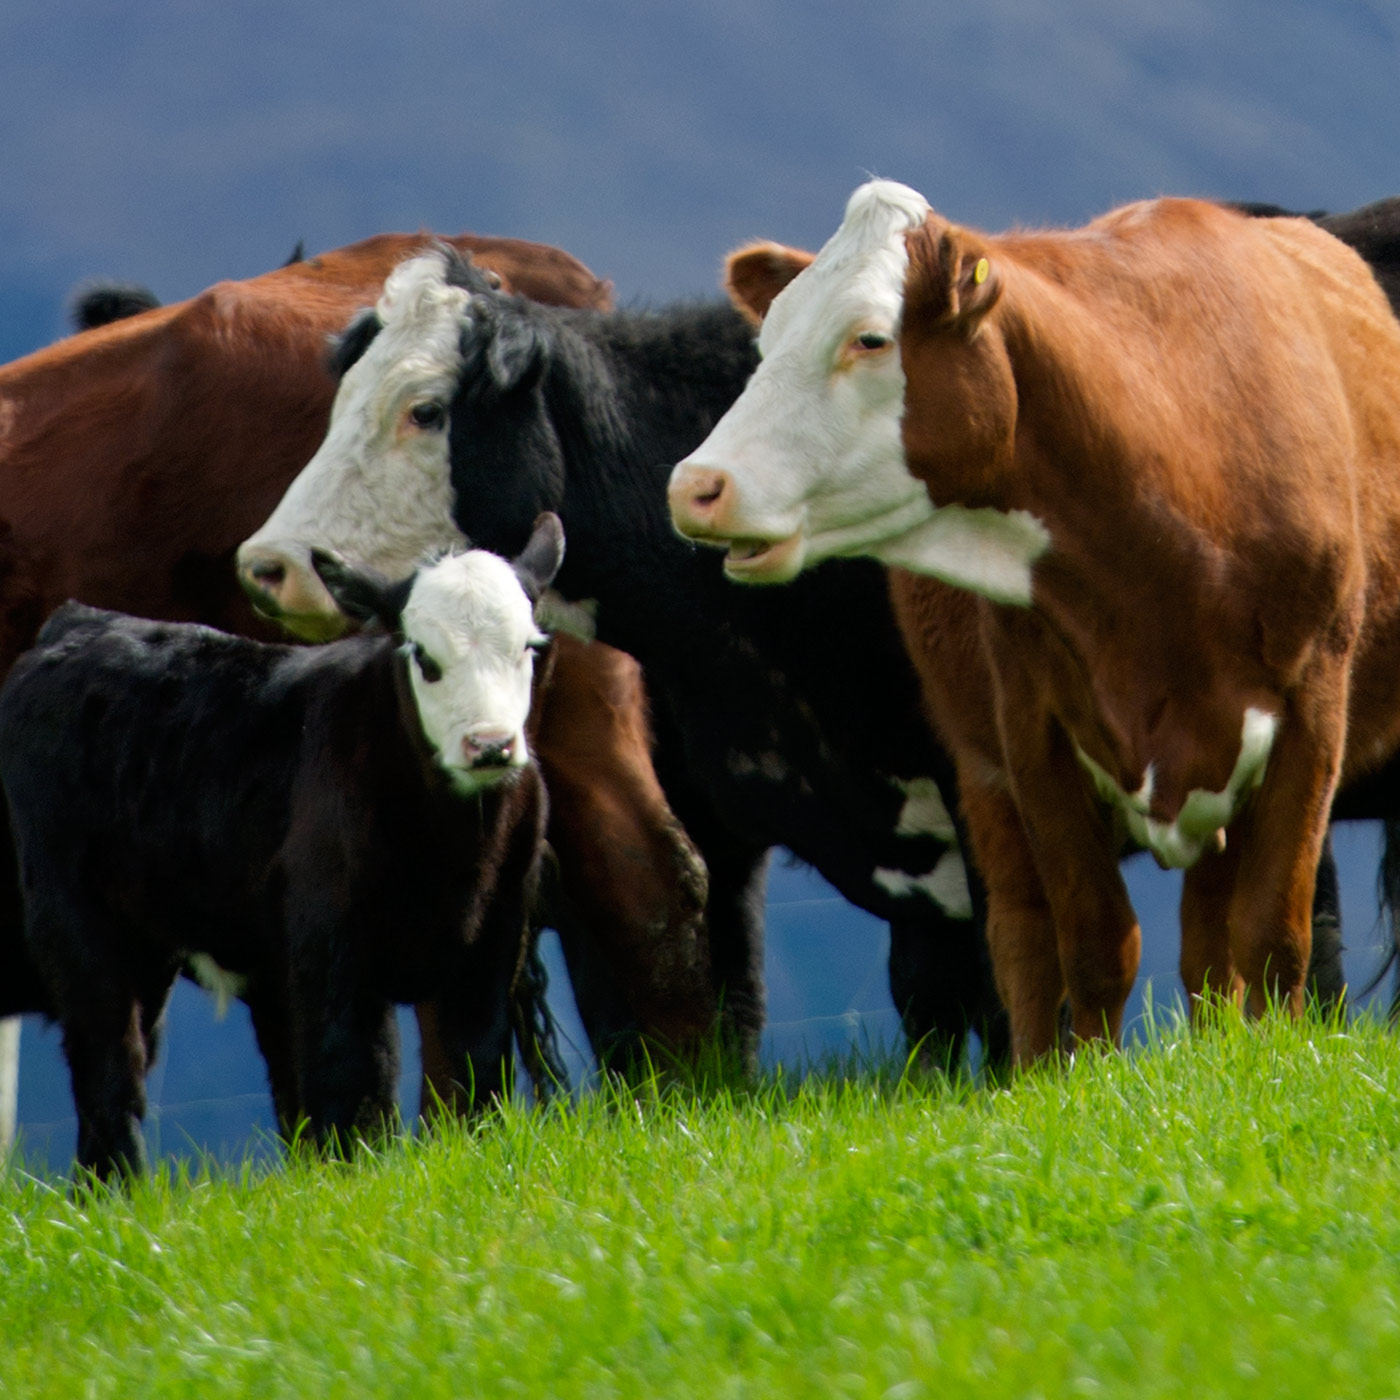 Craig Hickson and Mike Petersen: The New Zealand Red Meat Industry